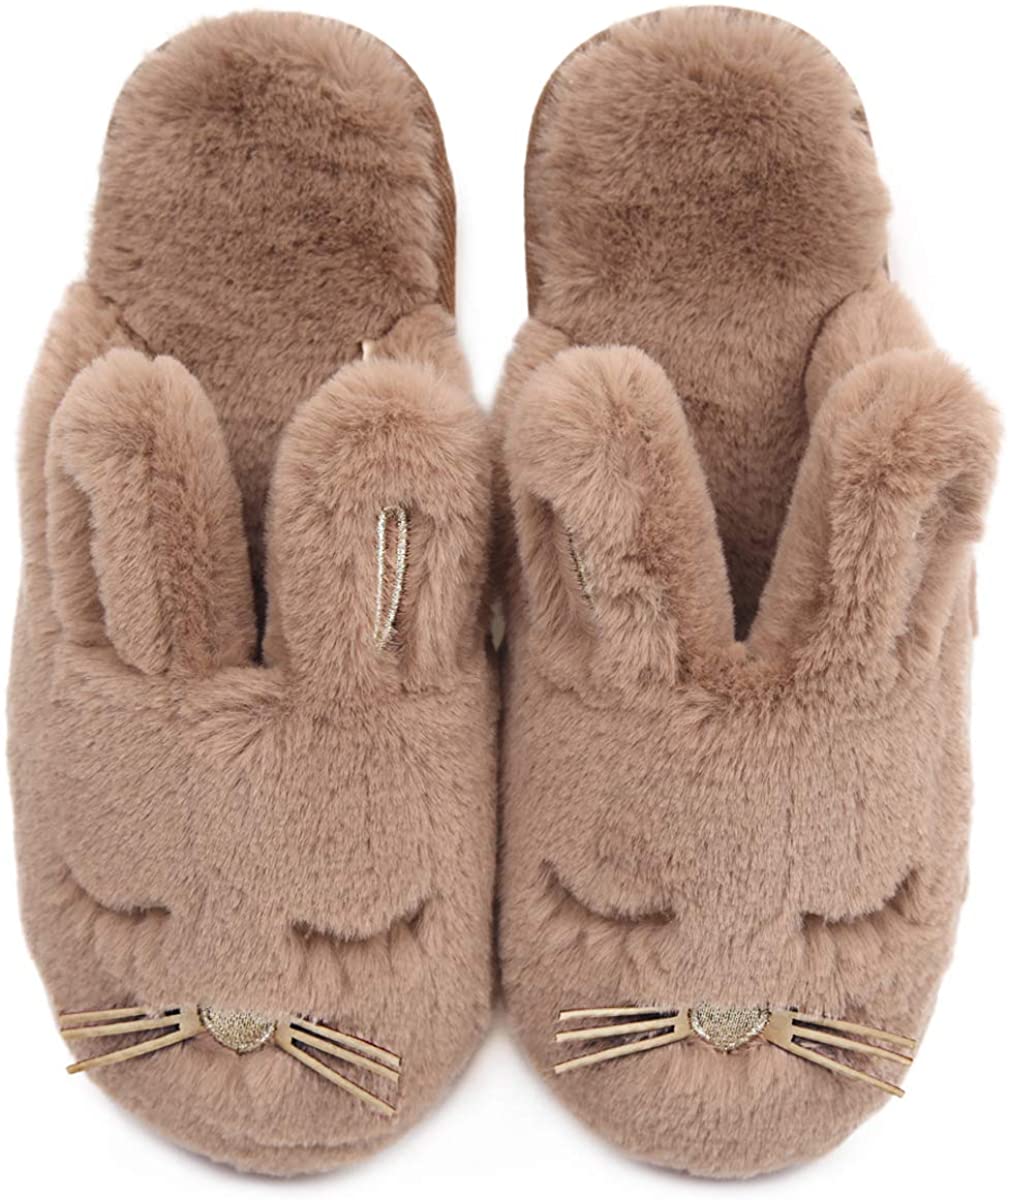 Butter Cream Up-cycled Mink Bunny Slippers 